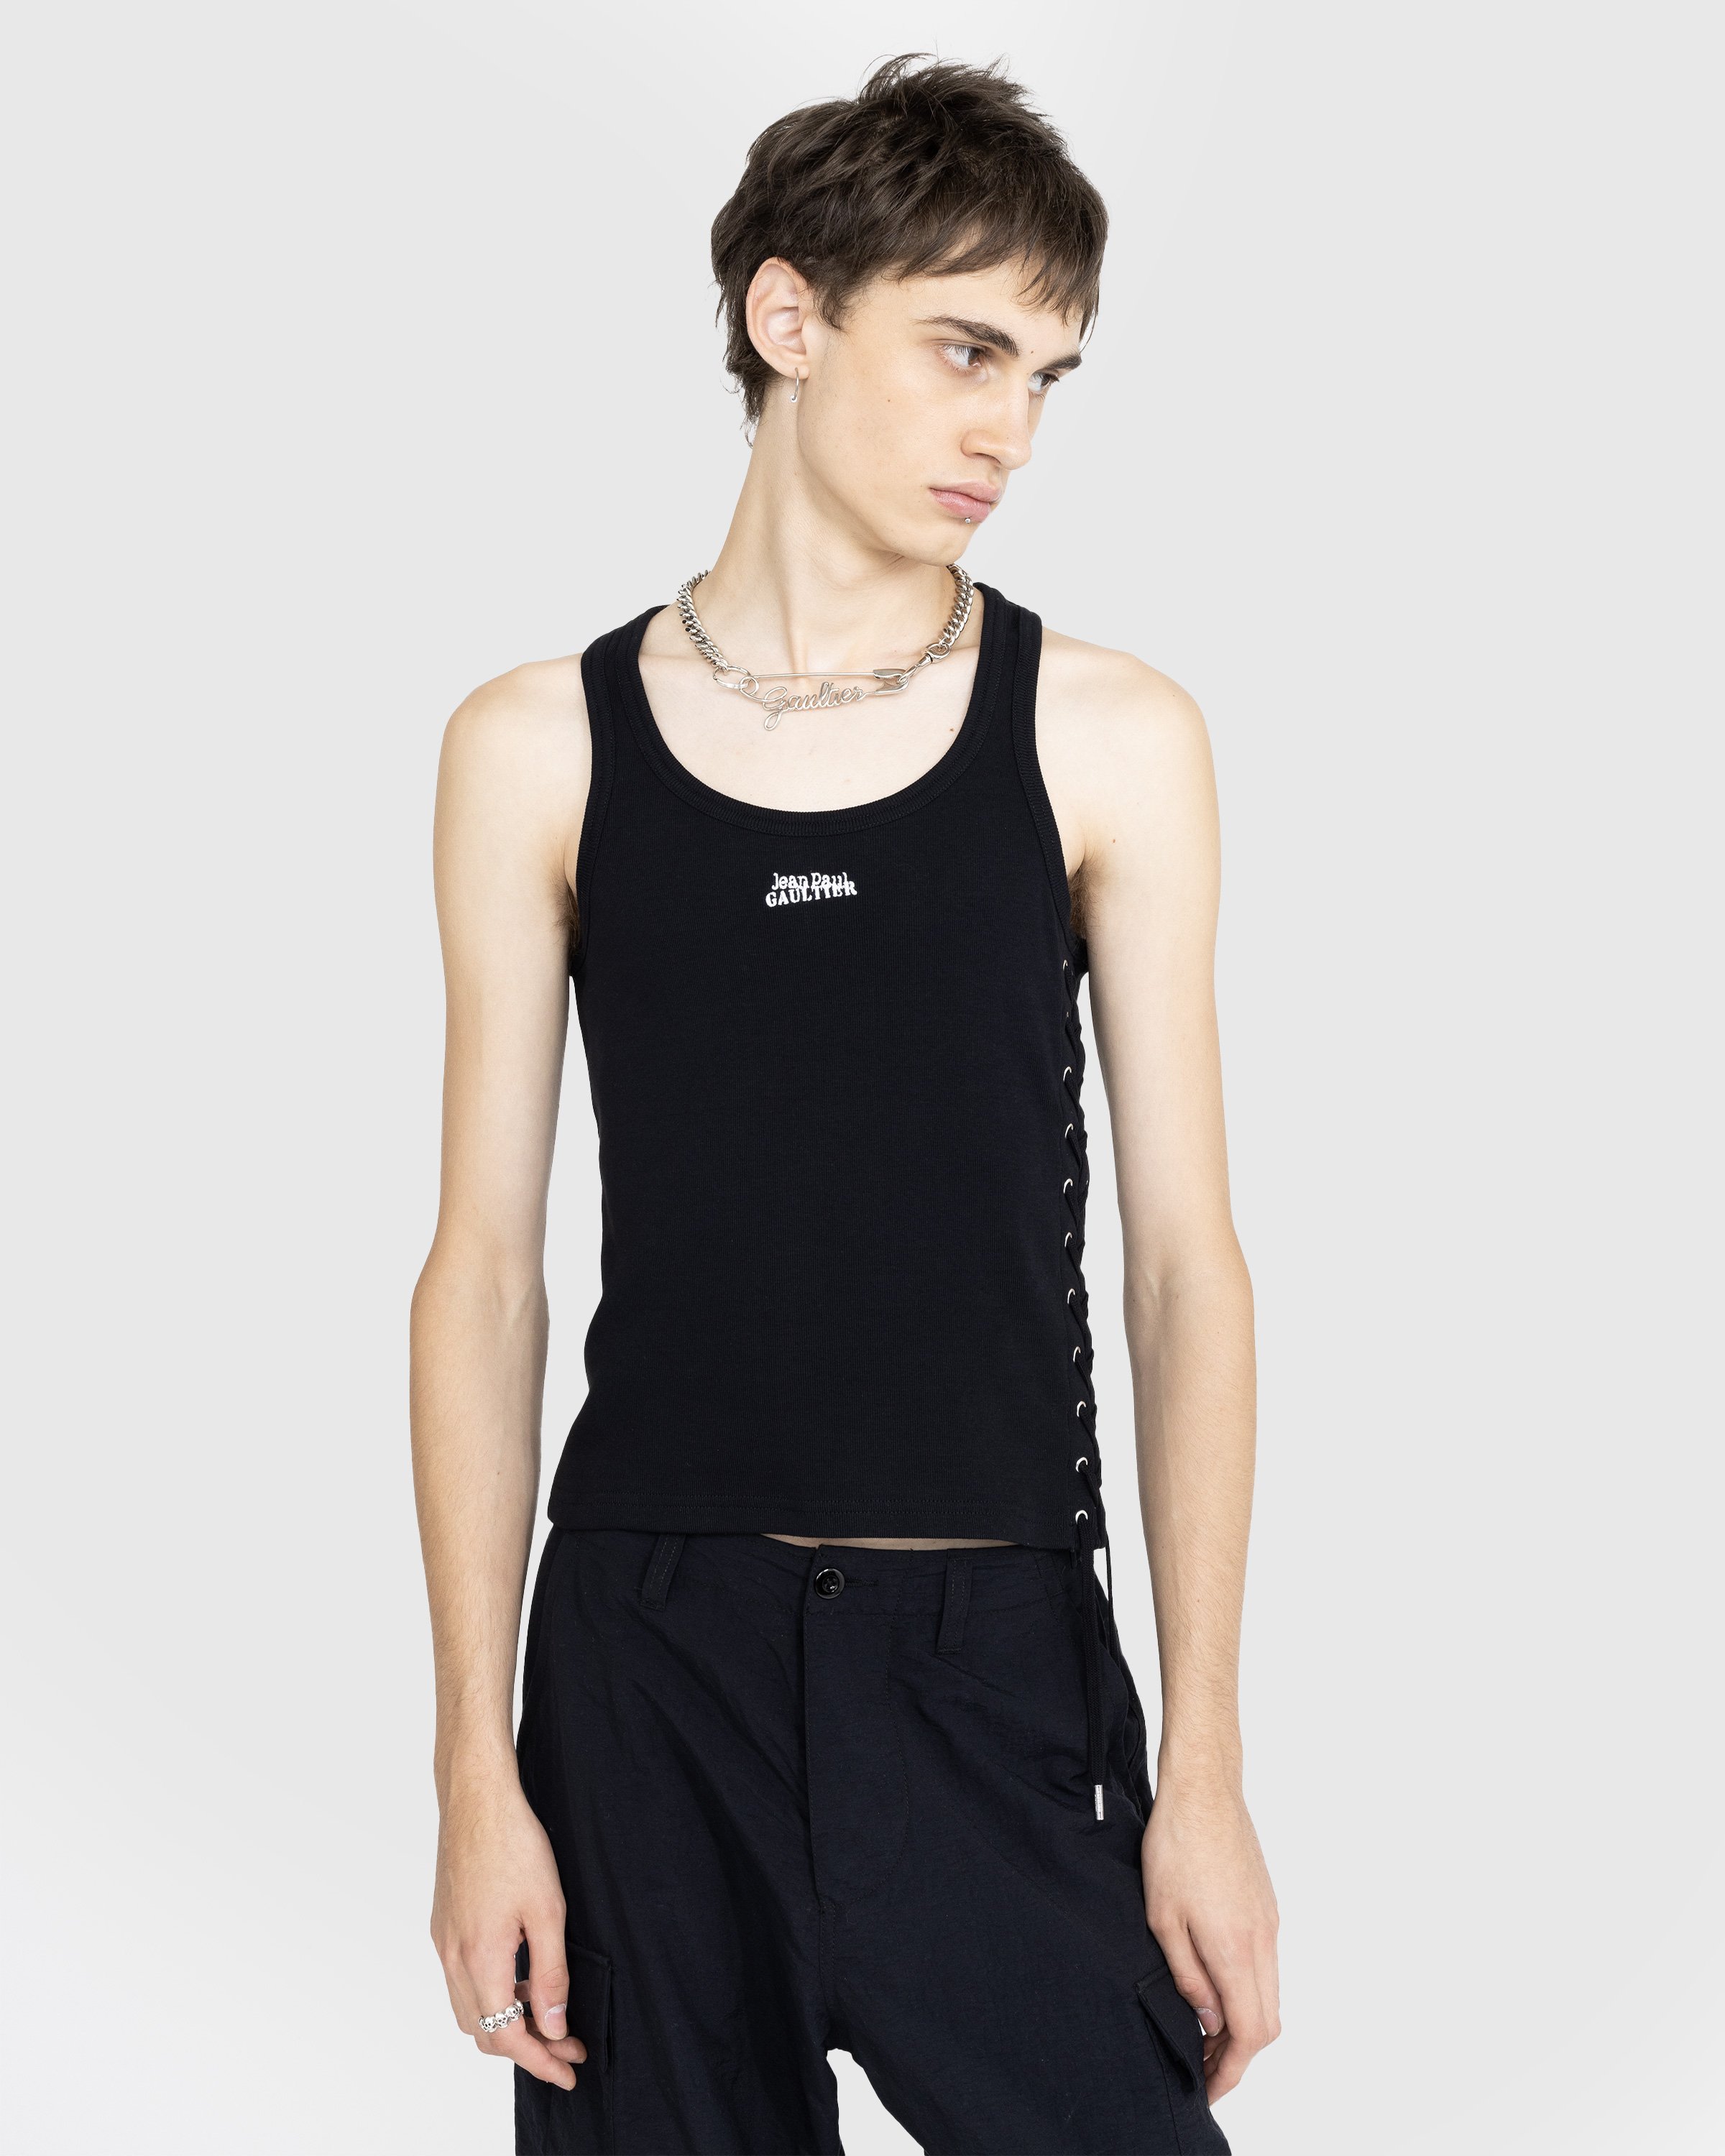 Jean Paul Gaultier - Laced Tank Top Black - Clothing - Black - Image 2